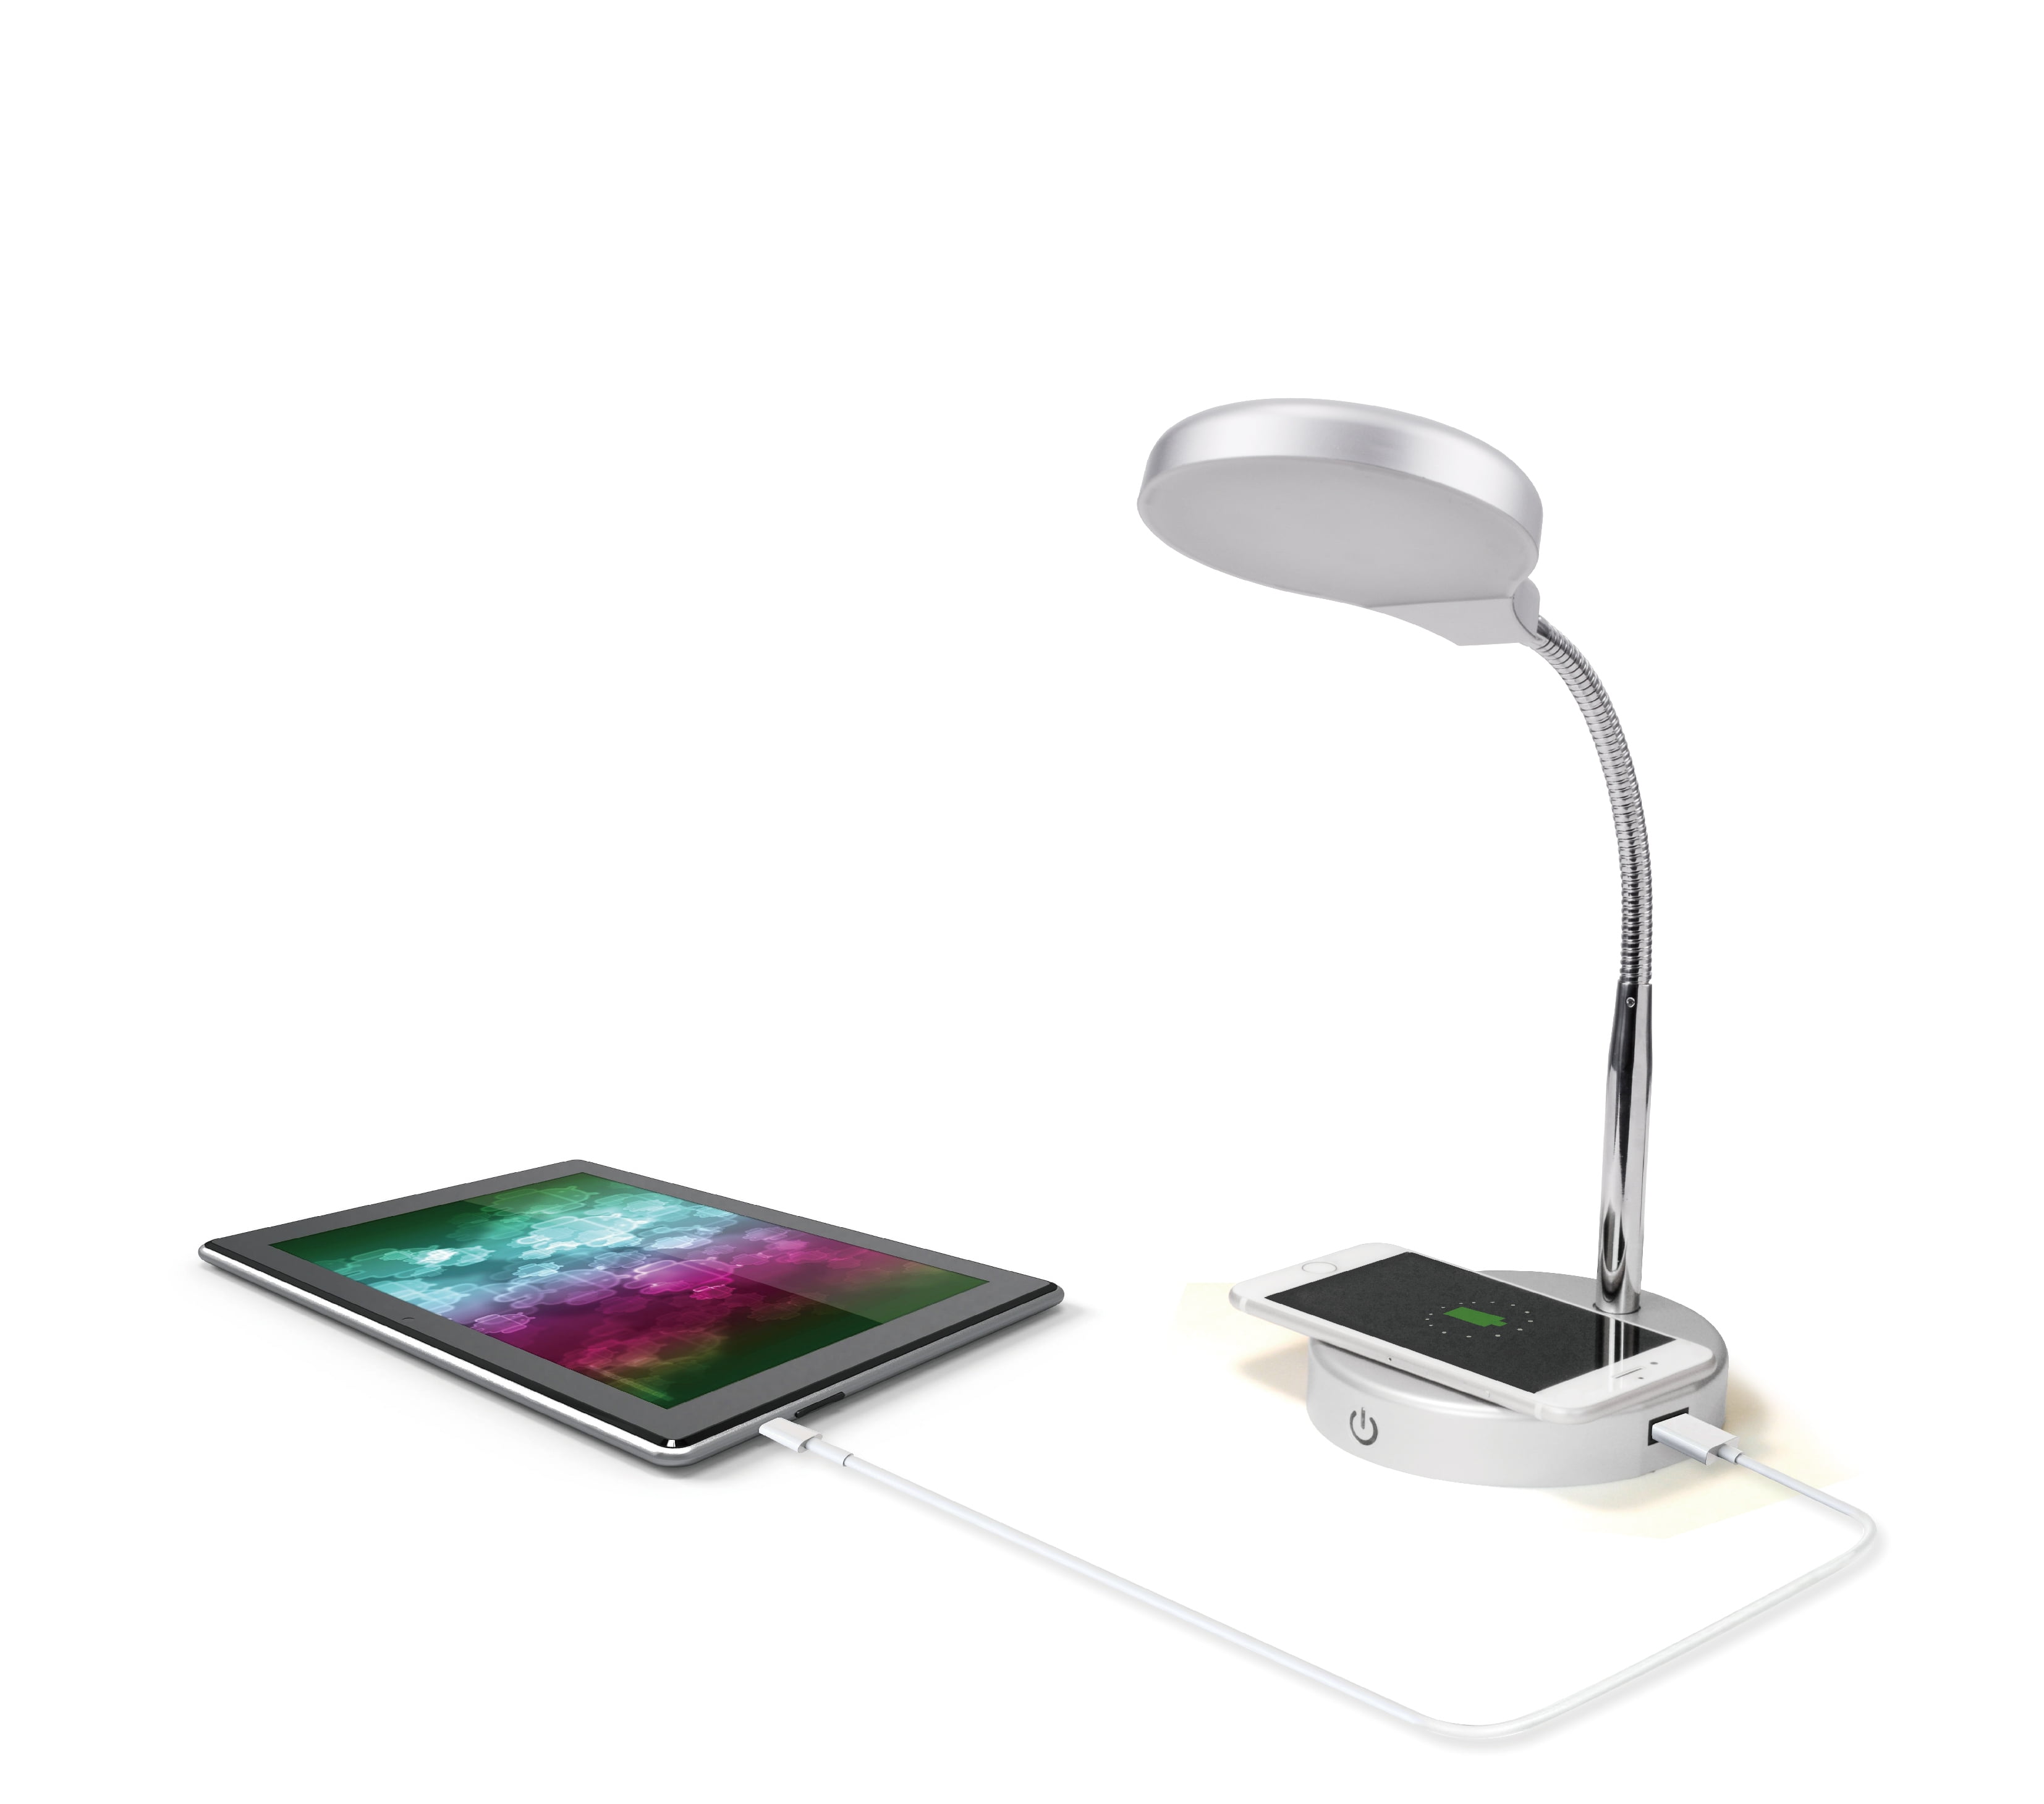 Mainstays LED Desk Lamp with Qi Wireless Charging and USB Port, Silver